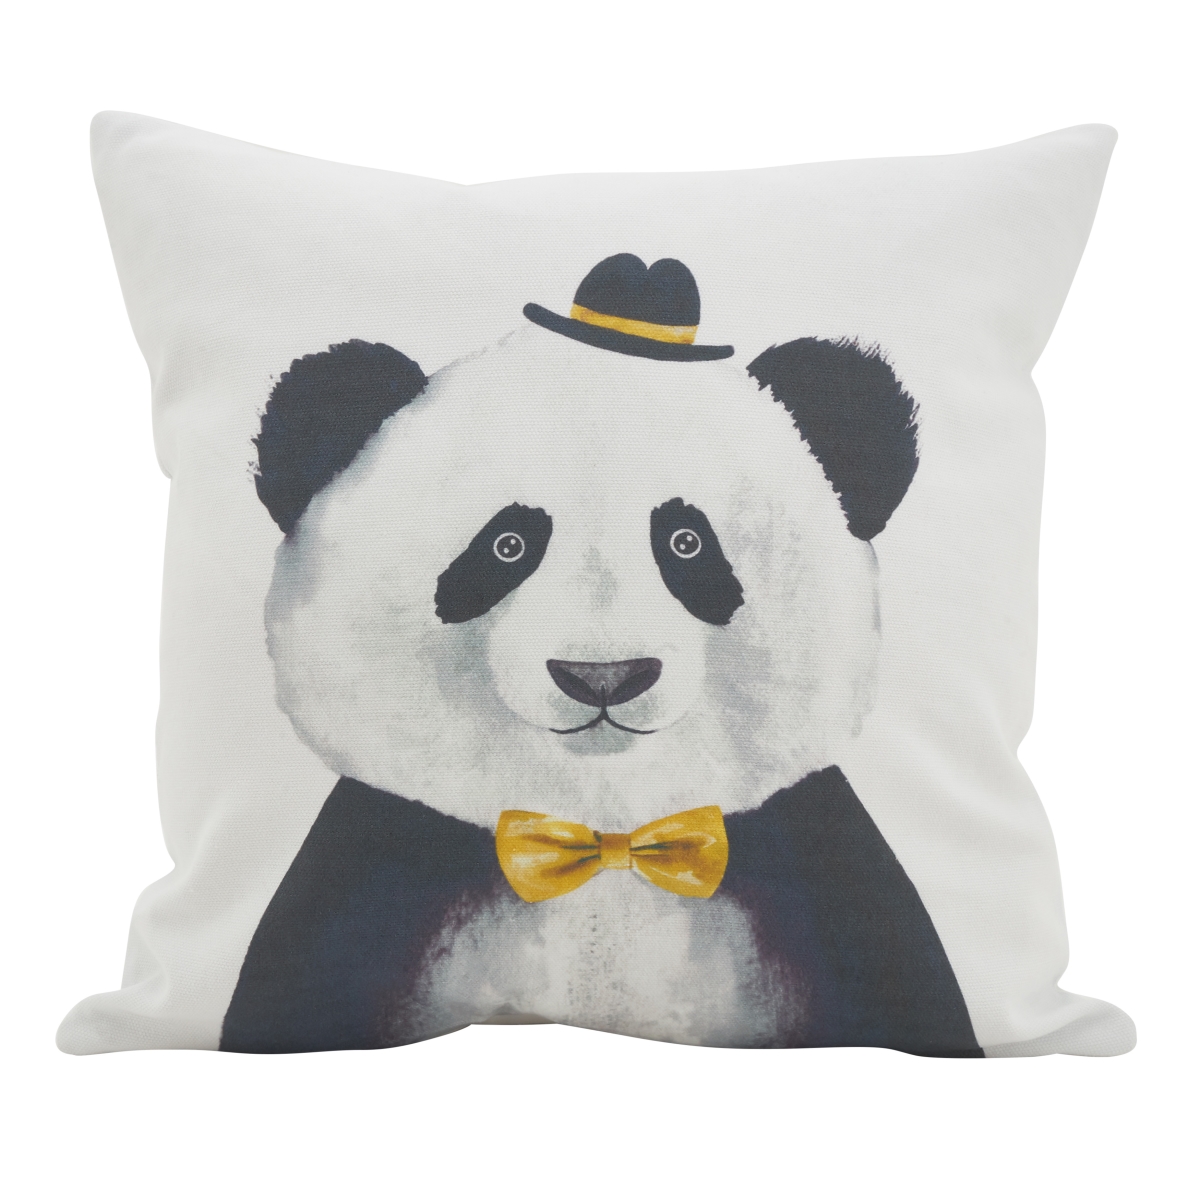 UPC 789323328311 product image for 6006.M16S 16 in. Square Fancy Panda Poly Filled Throw Pillow, Multi Color | upcitemdb.com